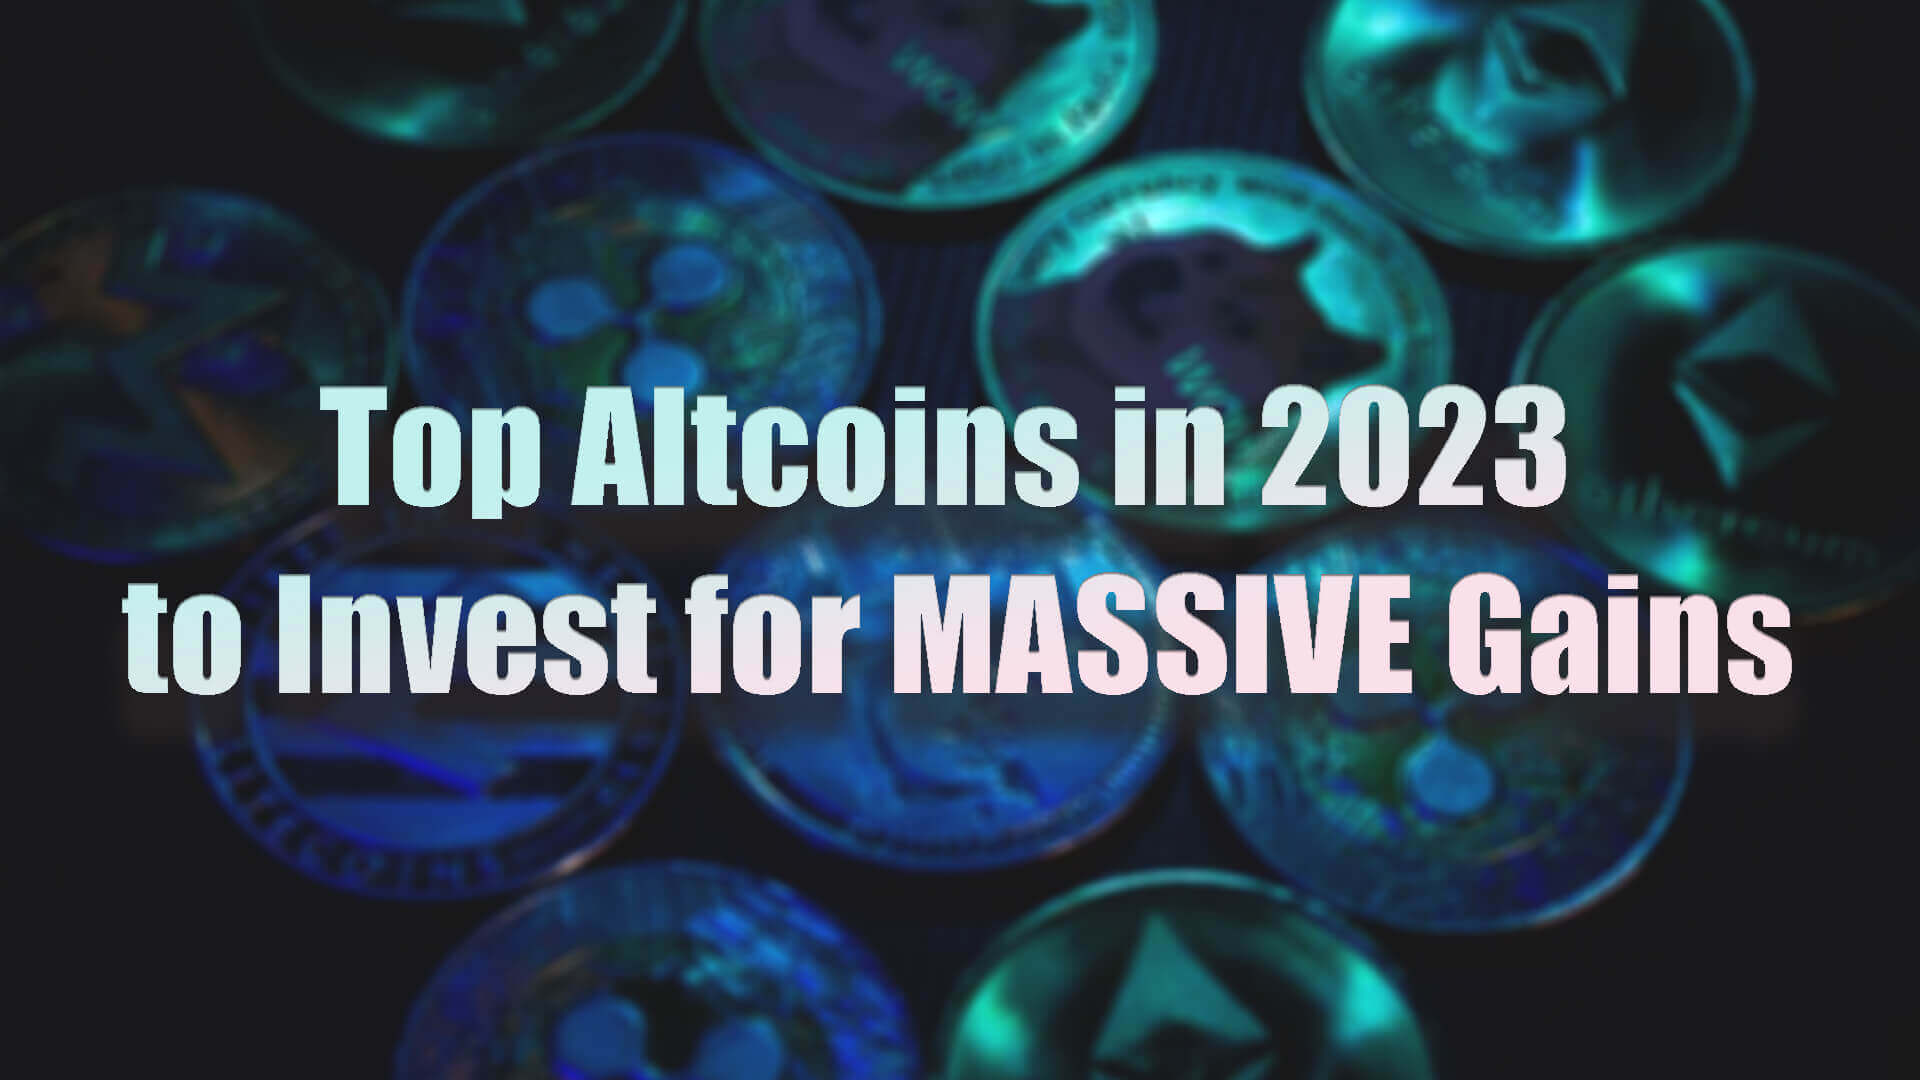 Best altcoins to Invest in 2023 for massive gains